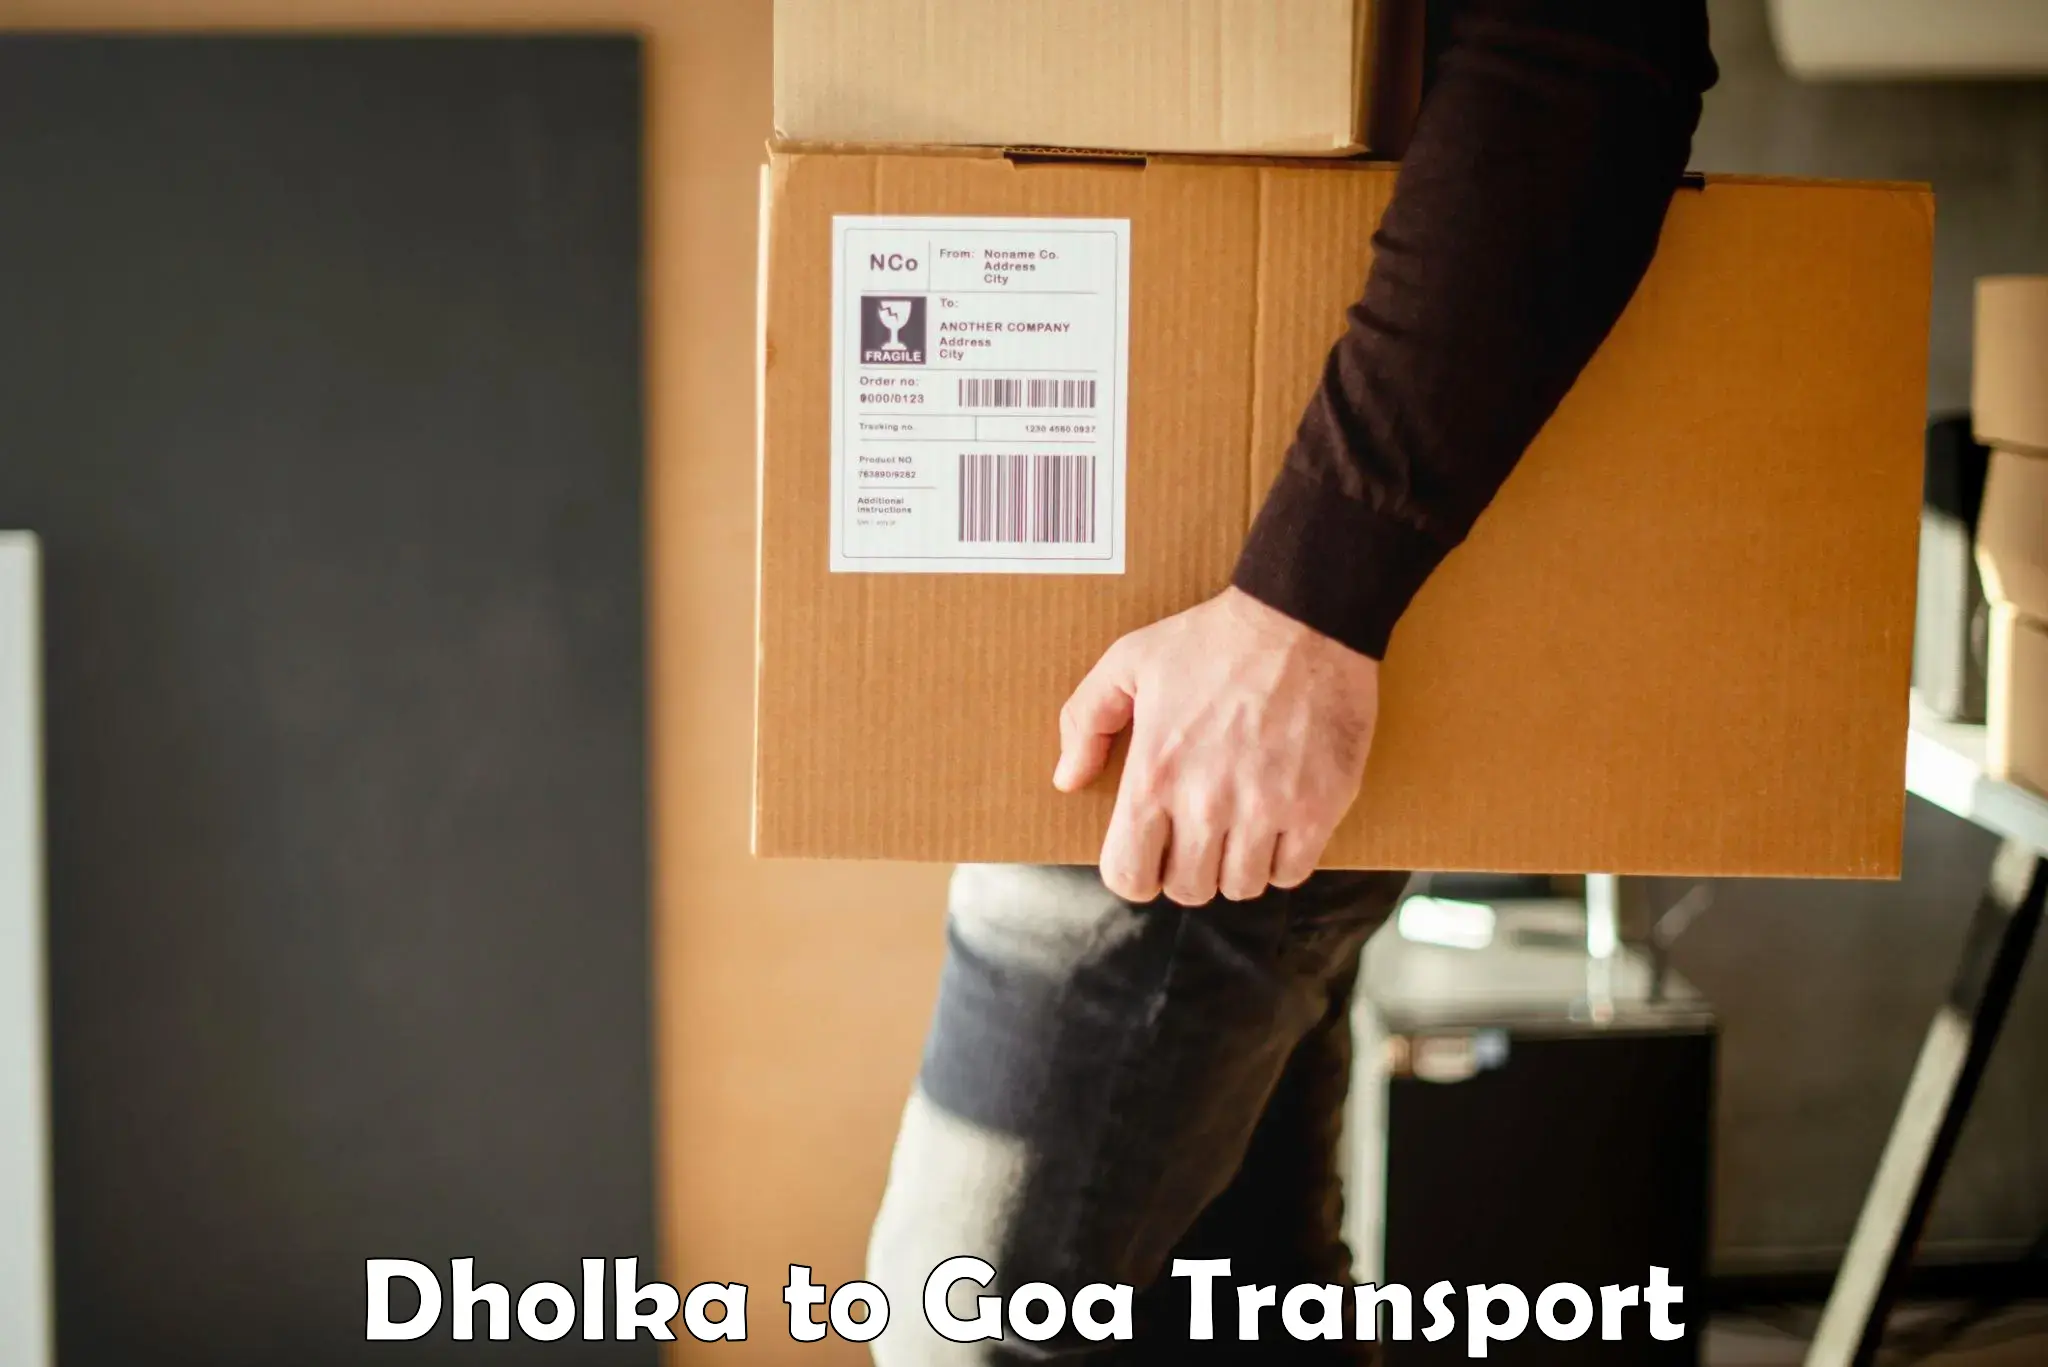 Road transport online services Dholka to Panaji